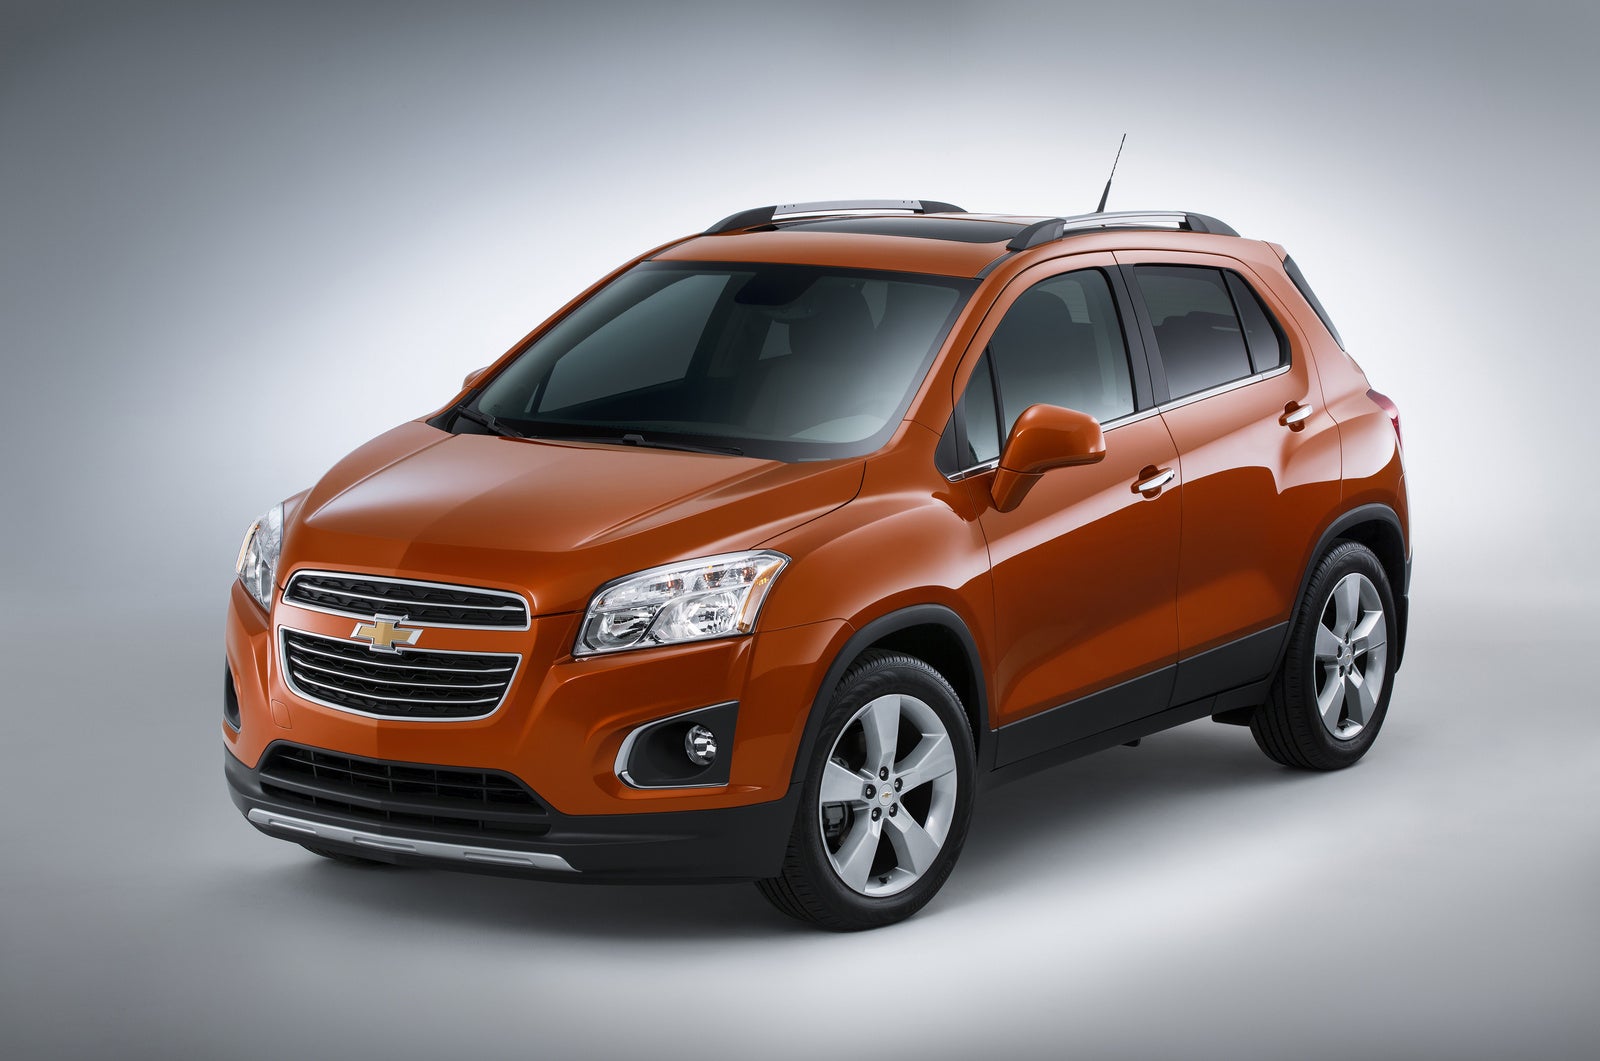 2015 Chevrolet Trax Test Drive Review - CarGurus